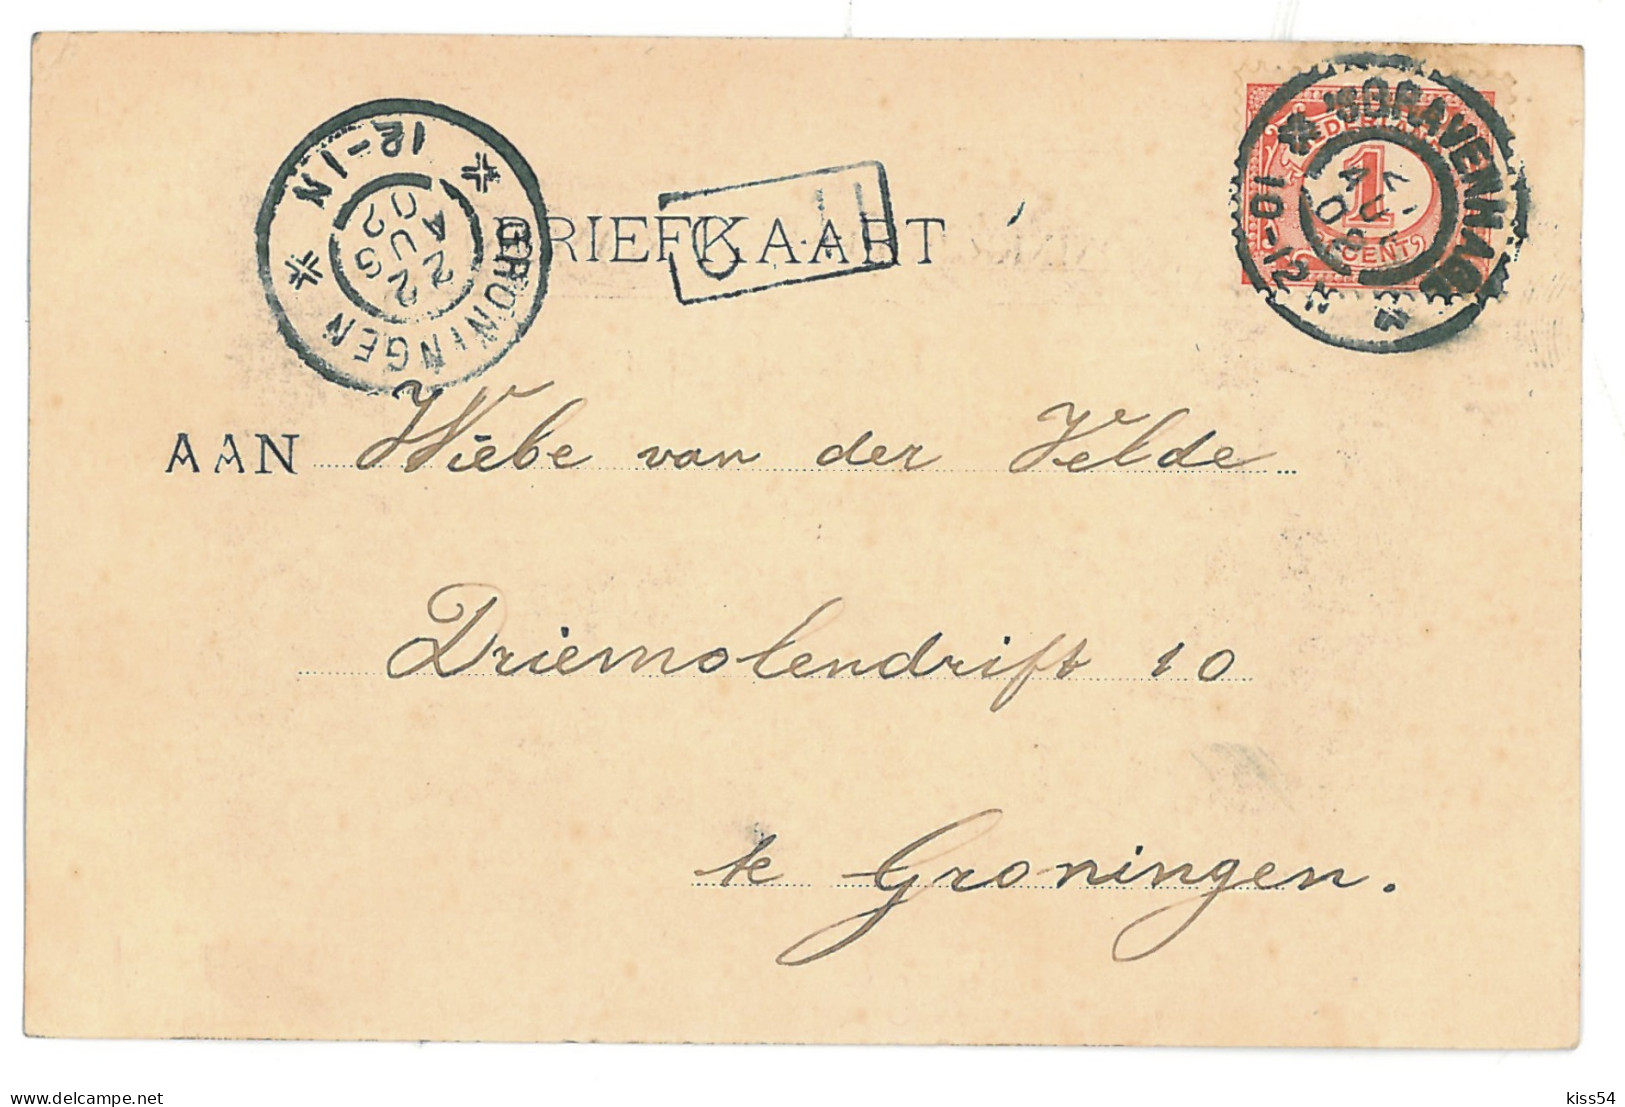 NED 4 - 12210 HOLLAND, Litho, Banknote 10 Gulden - Old Postcard - Used - 1902  - Monete (rappresentazioni)